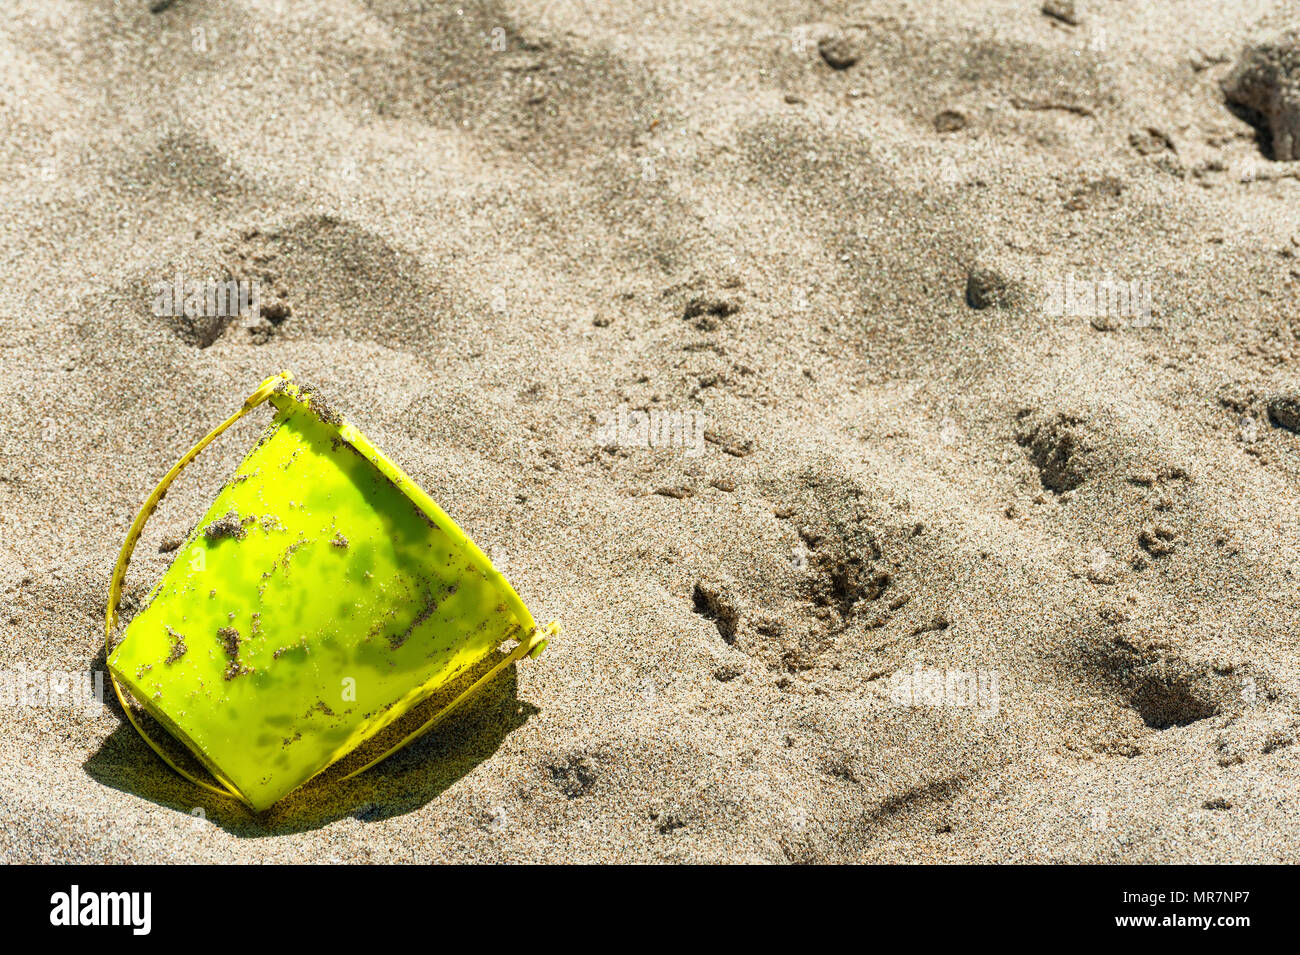 Closeup of a yellow bucket used in playing on a sandy coastal beach. Stock Photo